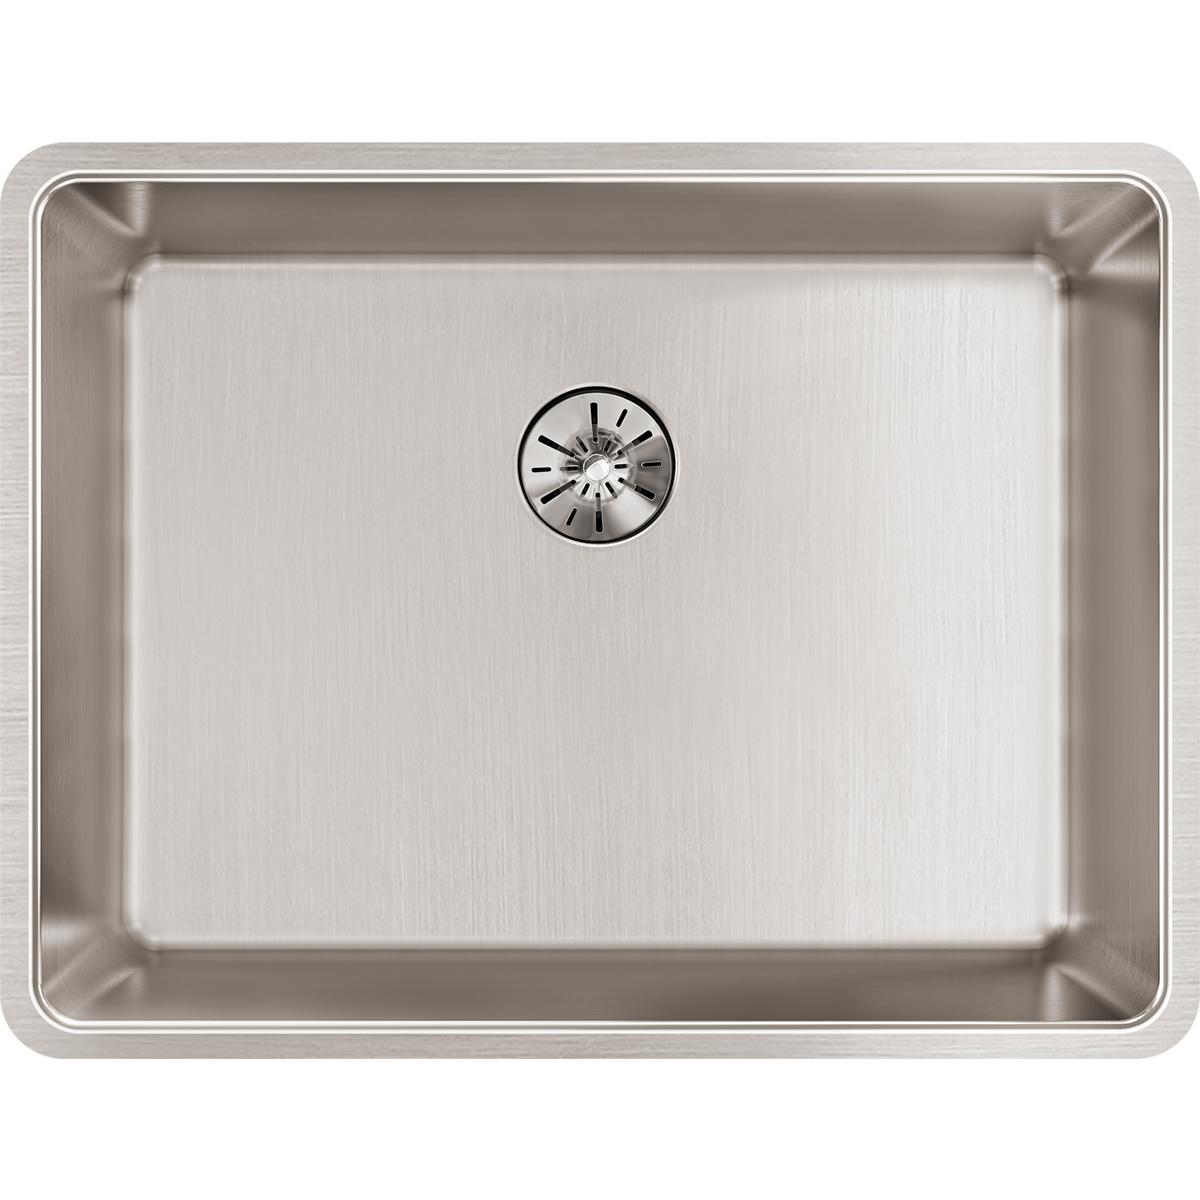 Elkay Lustertone Iconix Stainless Steel 23-1/2" x 18-1/4" x 9" Single Bowl Undermount Sink with Perfect Drain